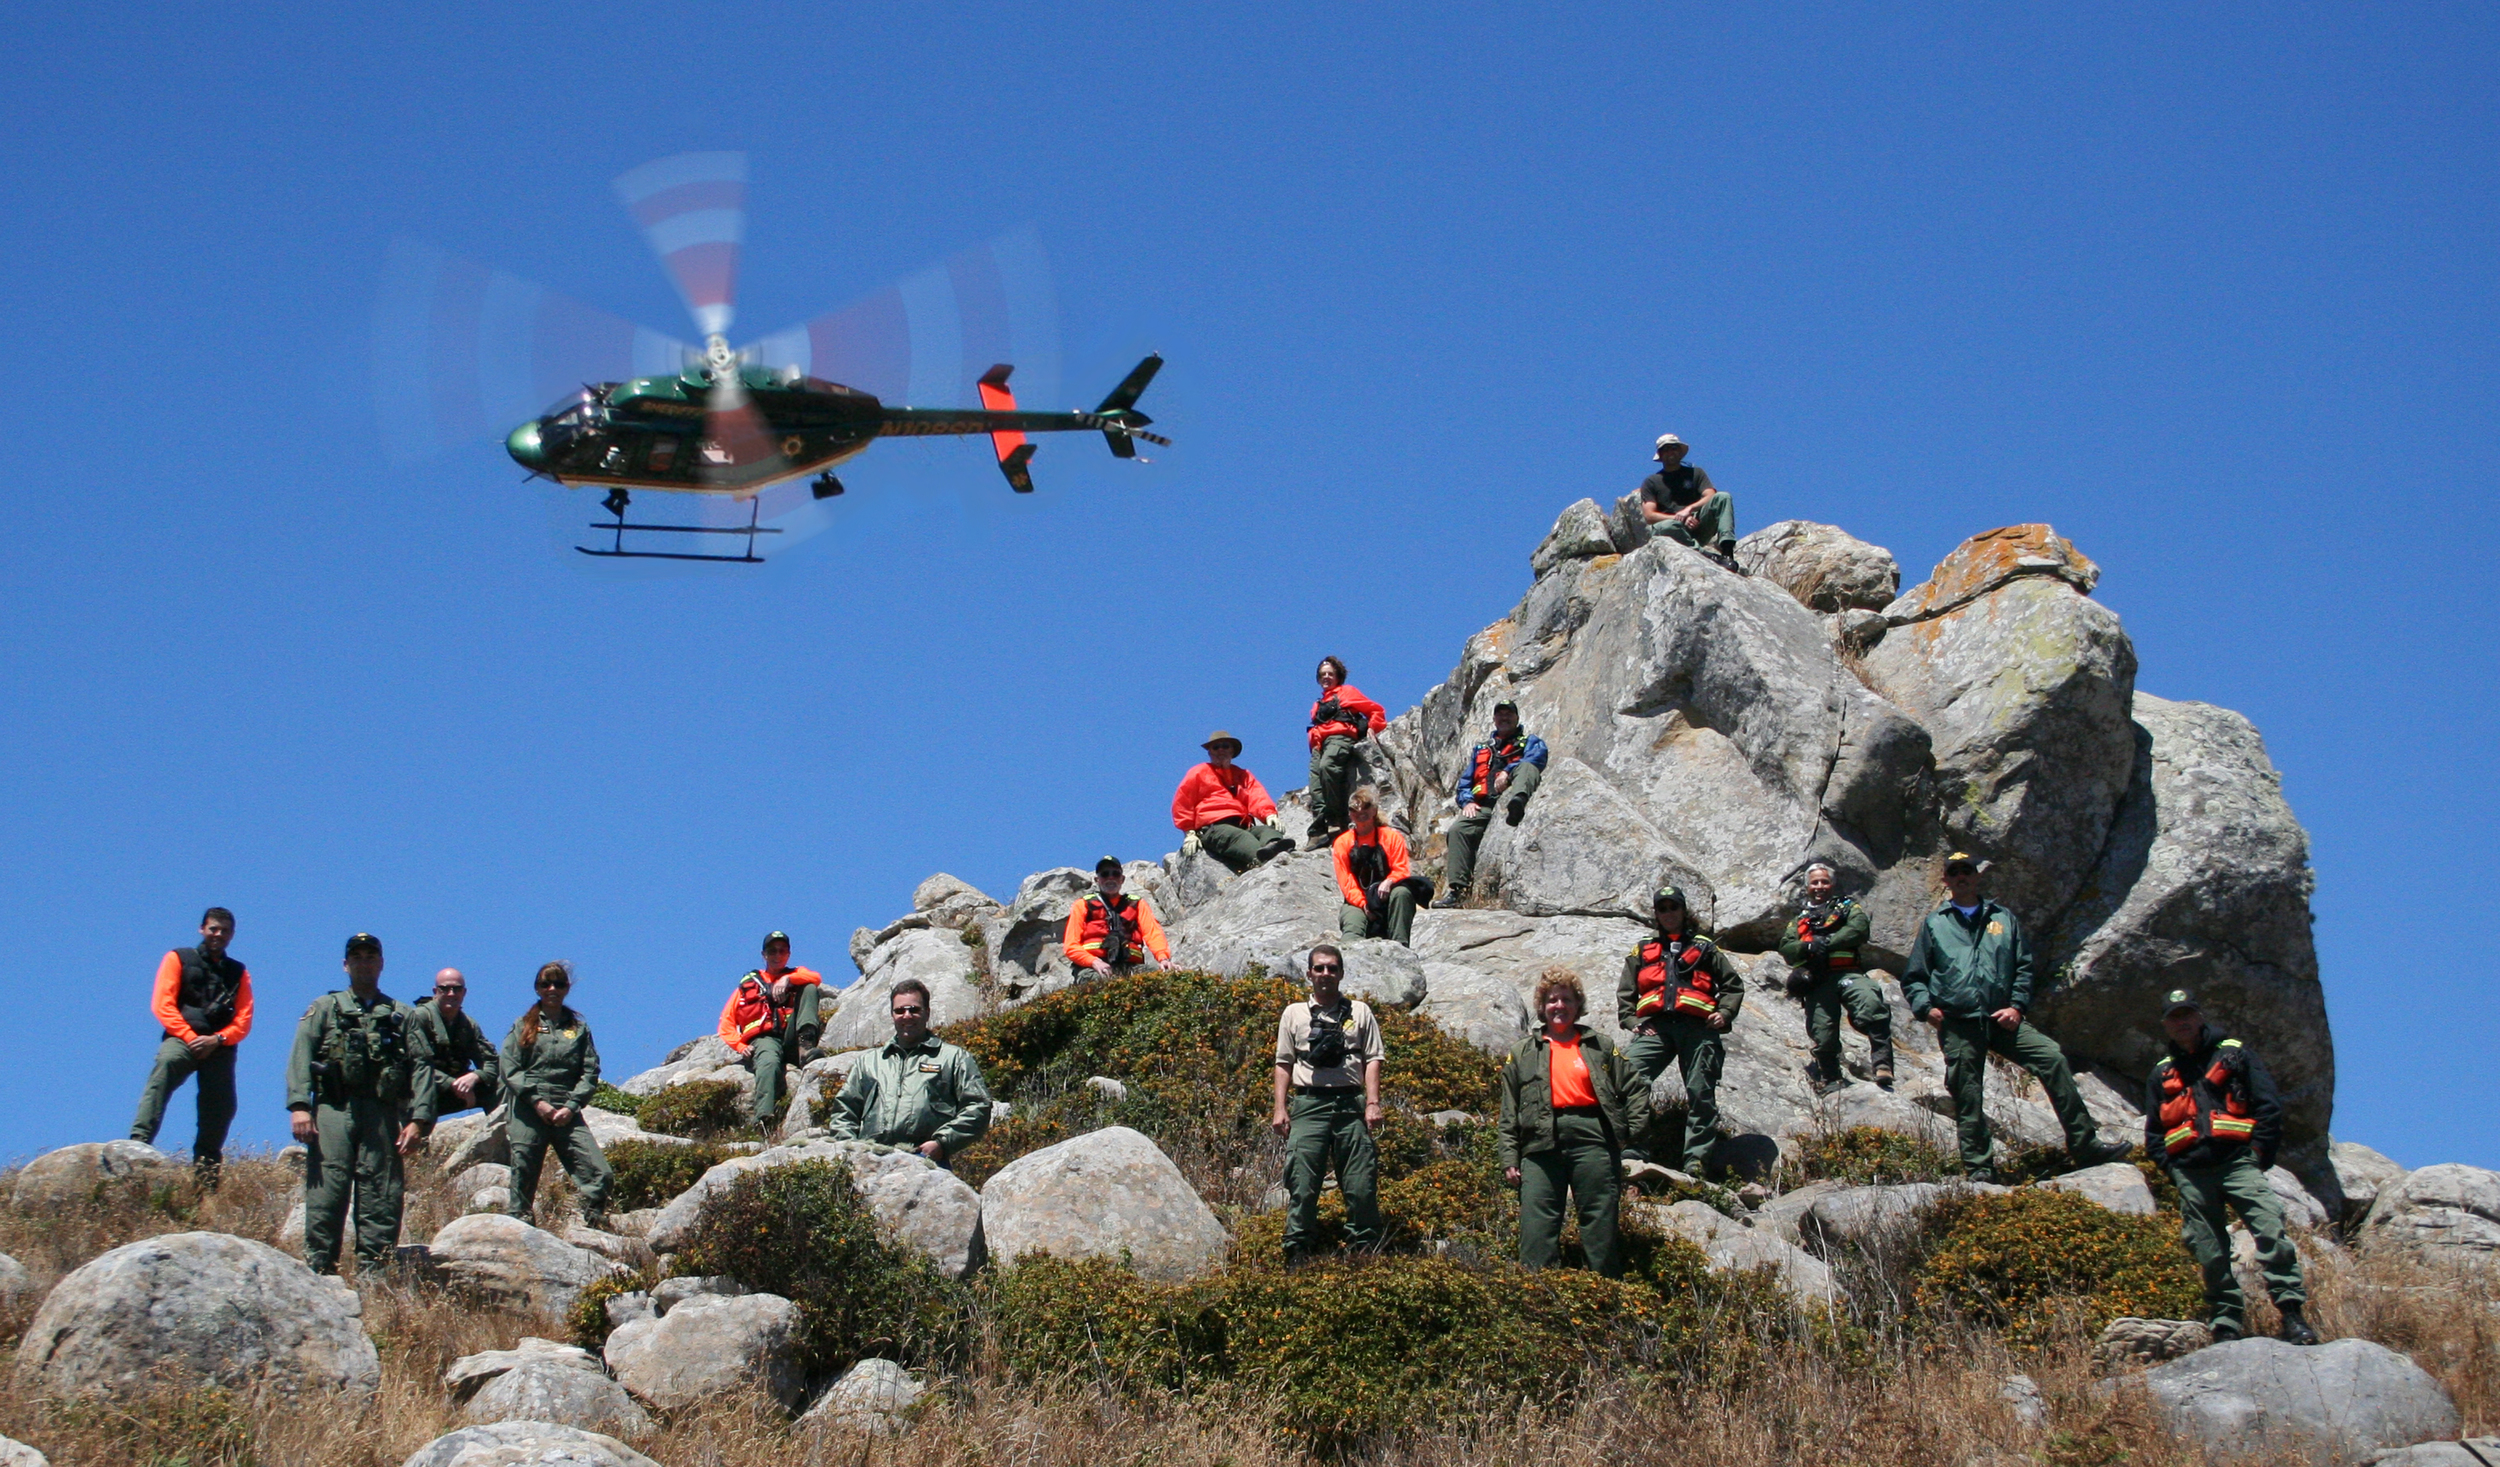 Henry 1 and the SAR team pose for a photo op at another amazing Sonoma County terrain.